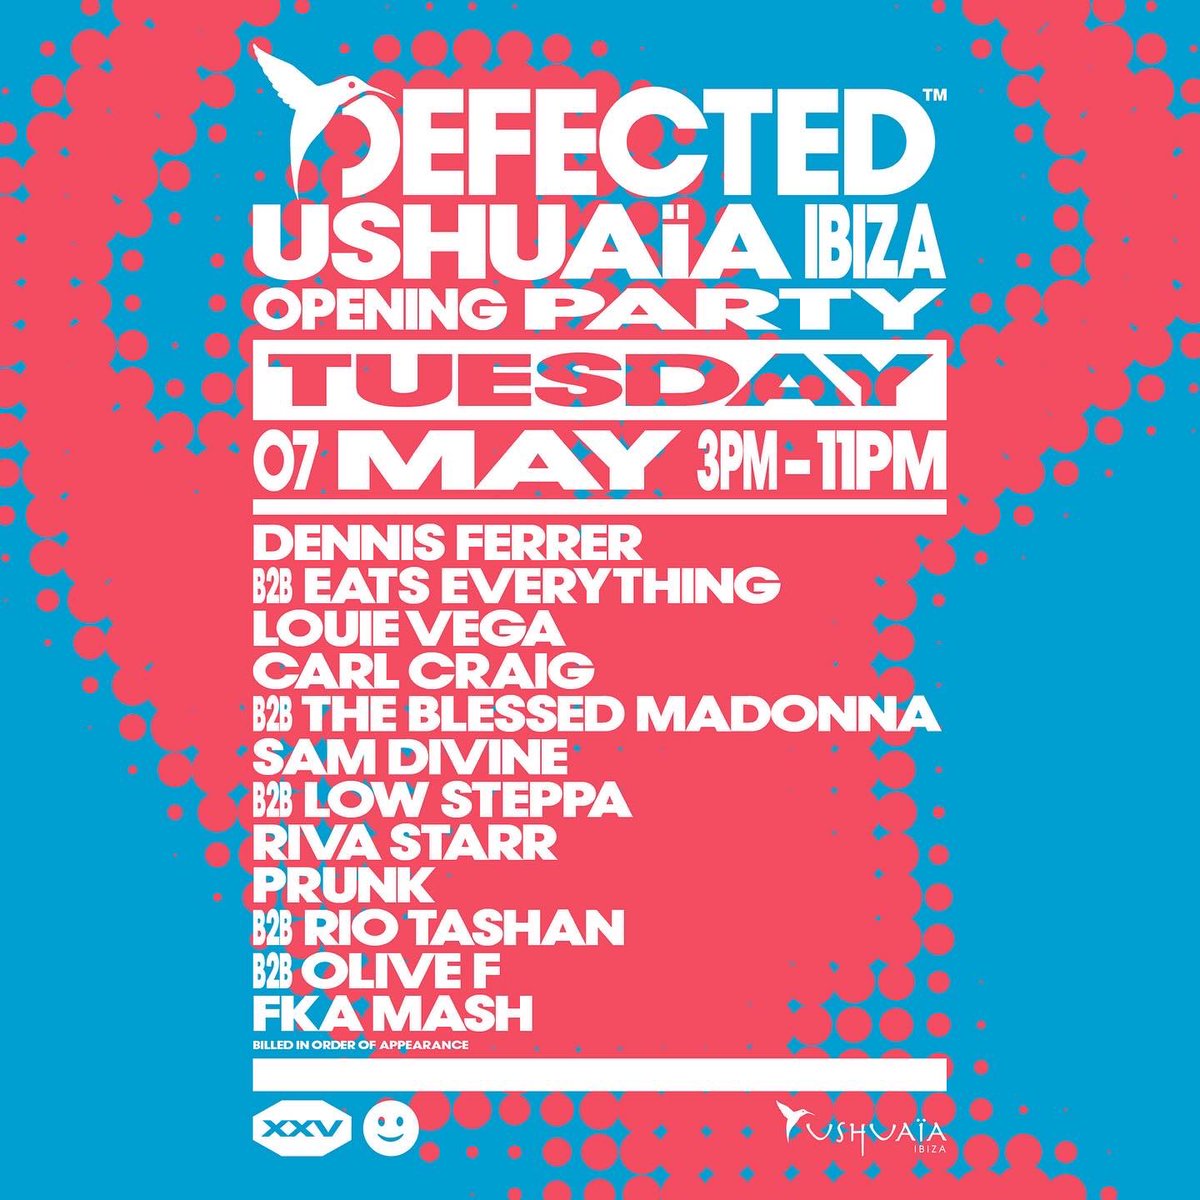 Touchdown Ibiza

First time on the Island. Debut @ushuaiaibiza for @DefectedRecords 

Let’s gooo!!!